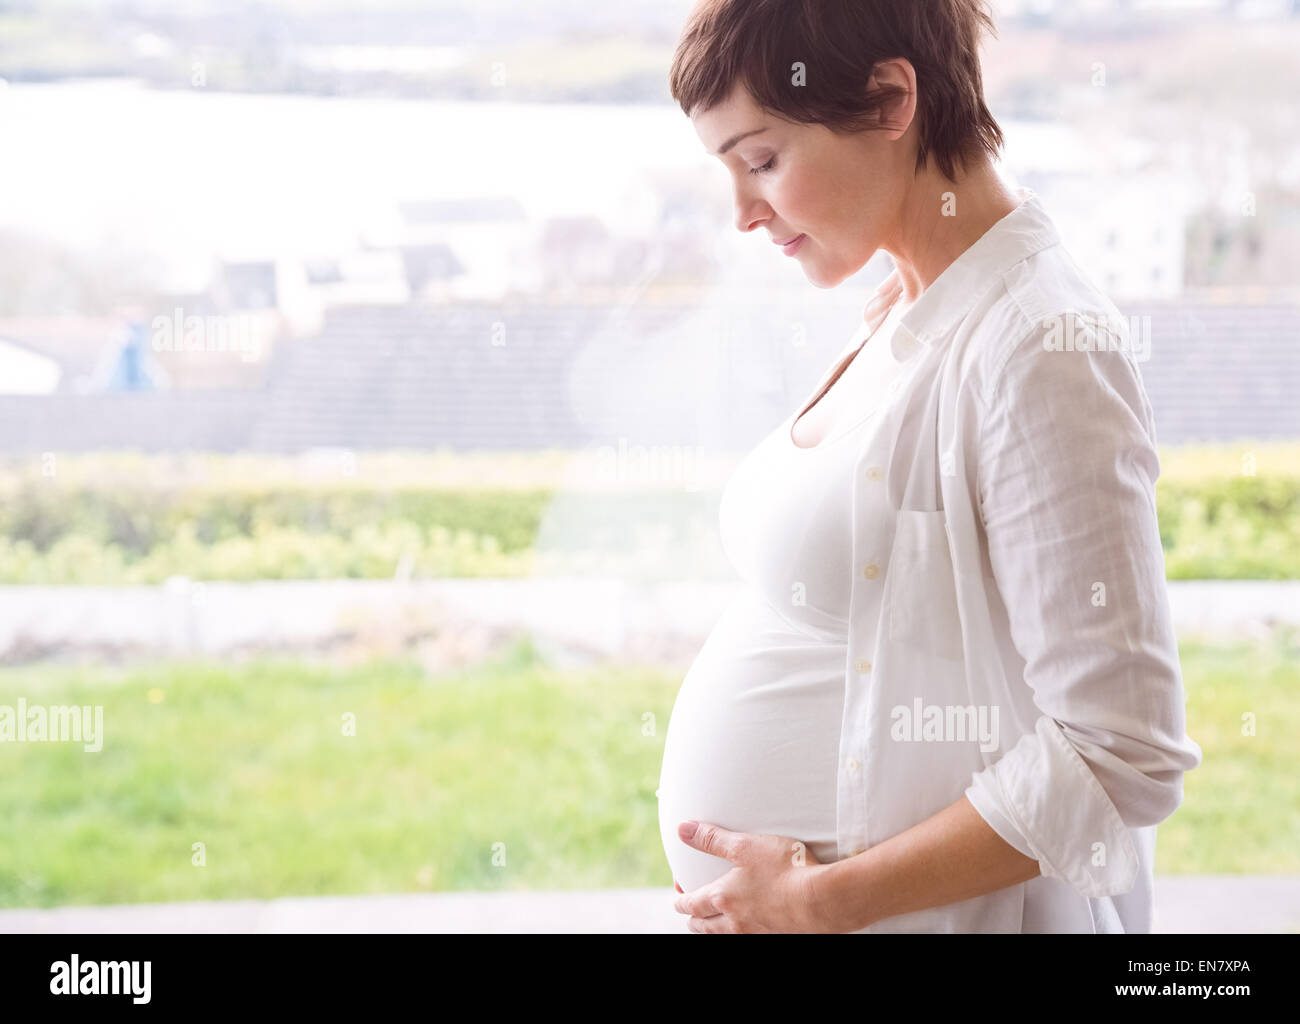 Pregnant woman holding her bump Banque D'Images